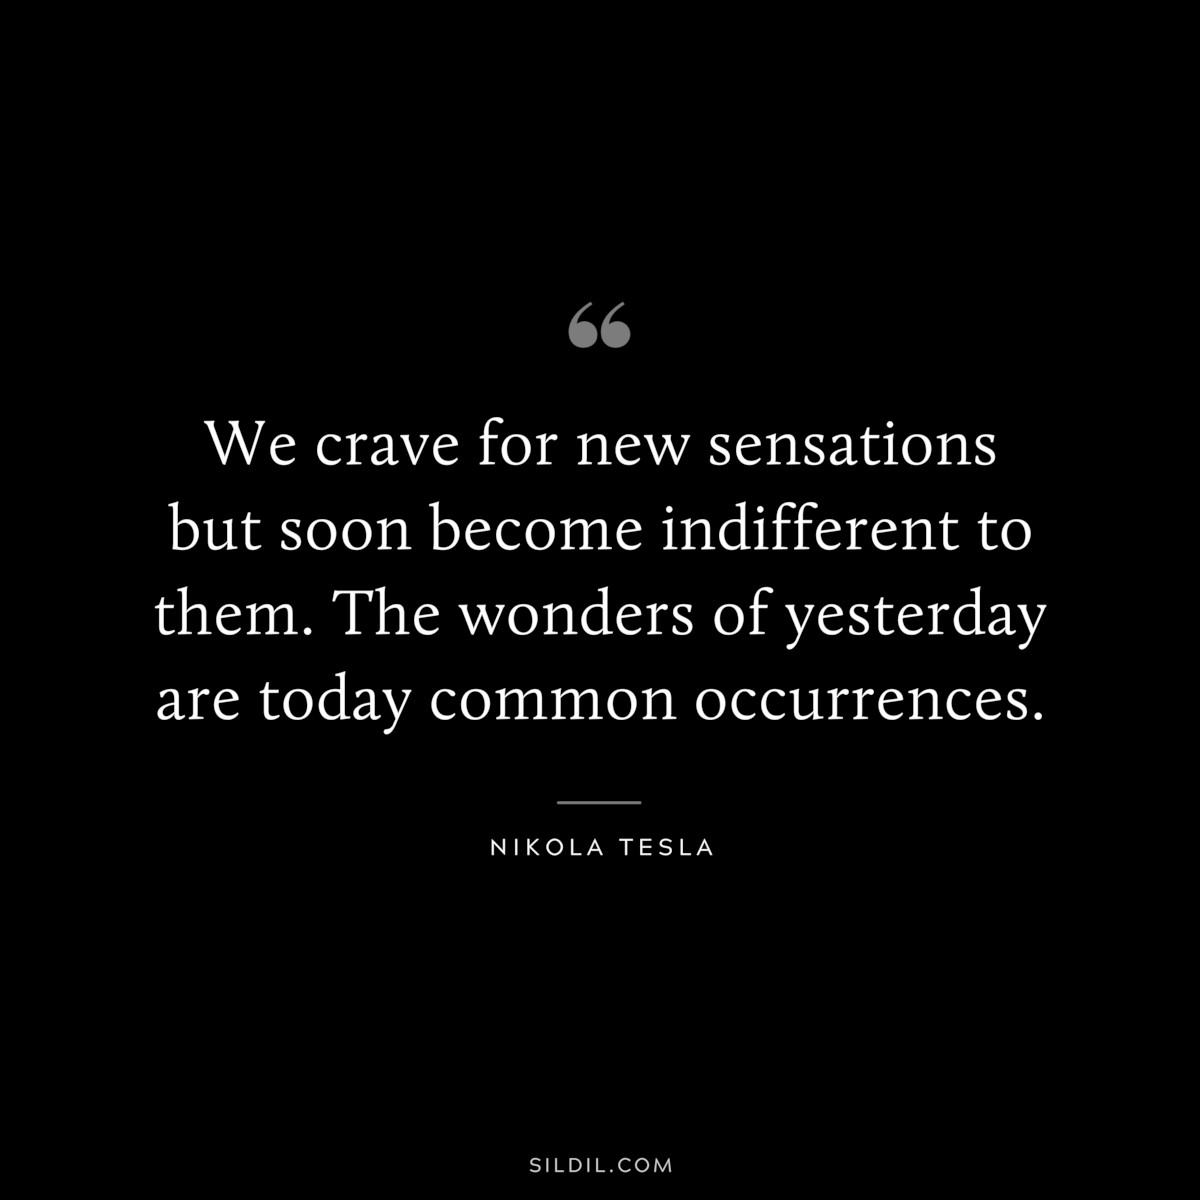 We crave for new sensations but soon become indifferent to them. The wonders of yesterday are today common occurrences. ― Nikola Tesla